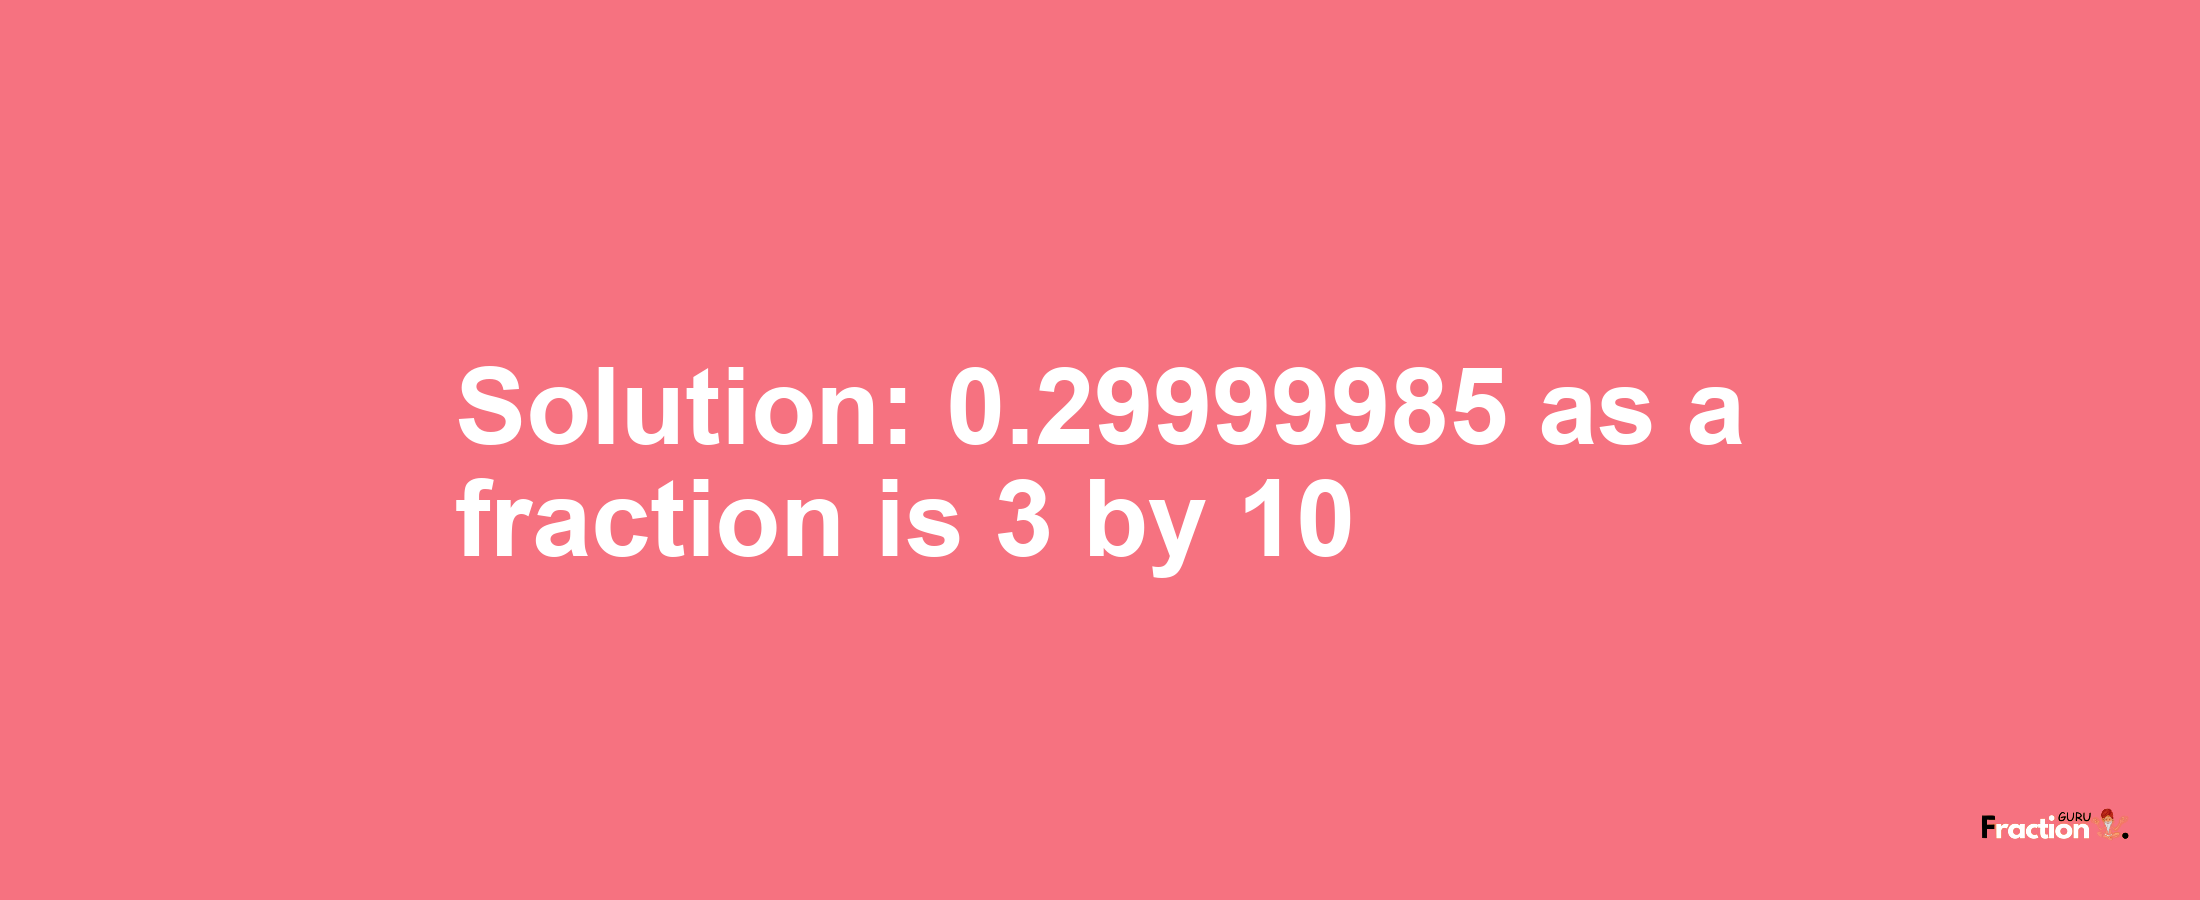 Solution:0.29999985 as a fraction is 3/10